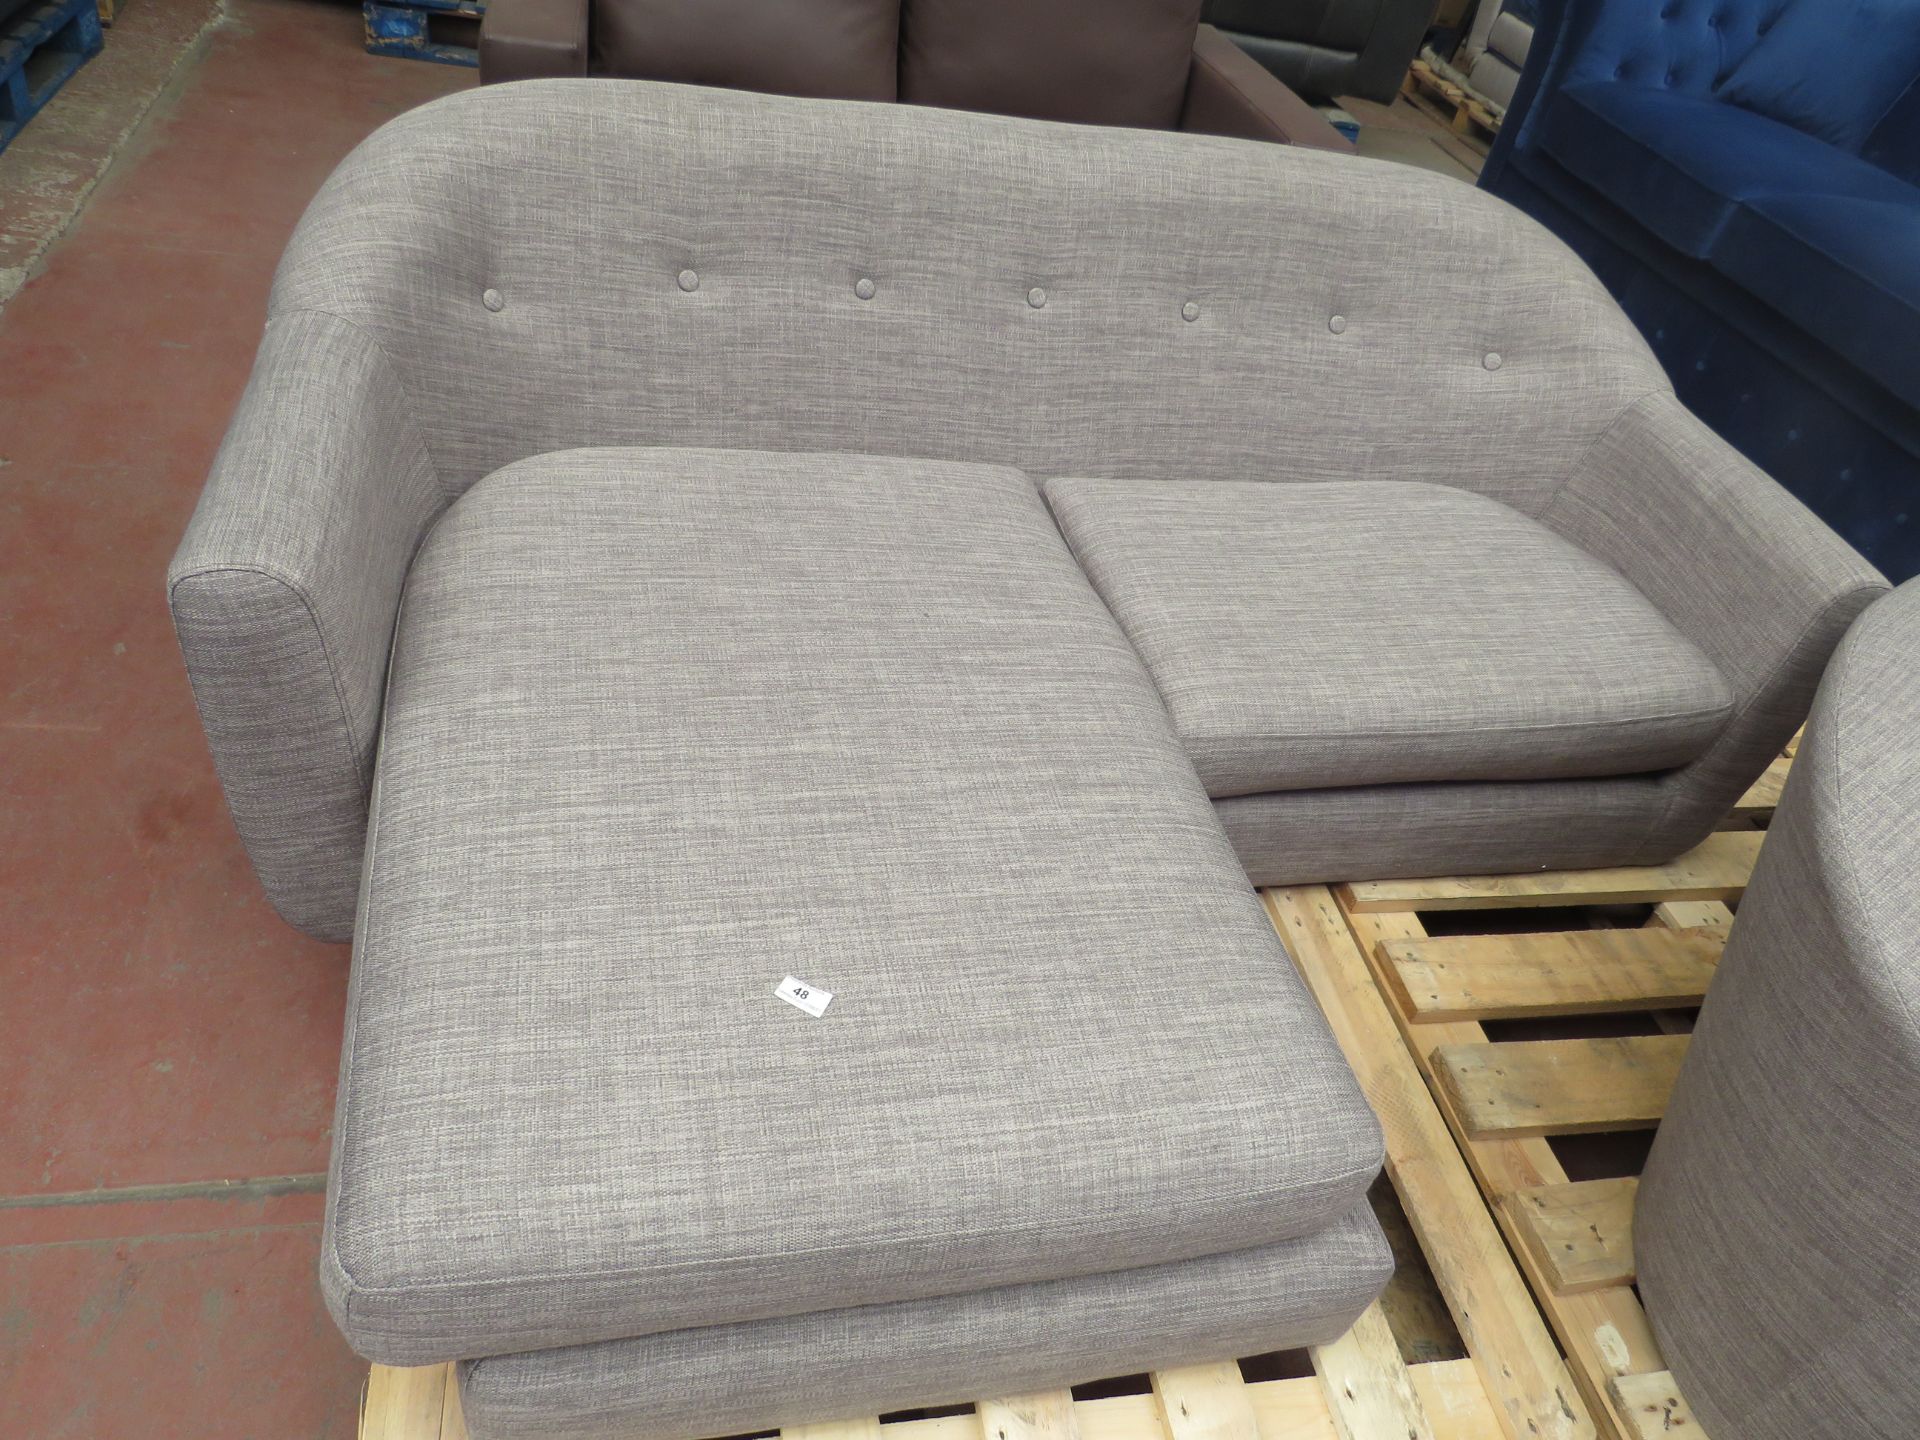 | 1X | MADE.COMM LOTTIE COMPACT CHAISE END SOFA, CHALK GREY | NO VISIBLE DAMAGE (NO GUARANTEE) | RRP